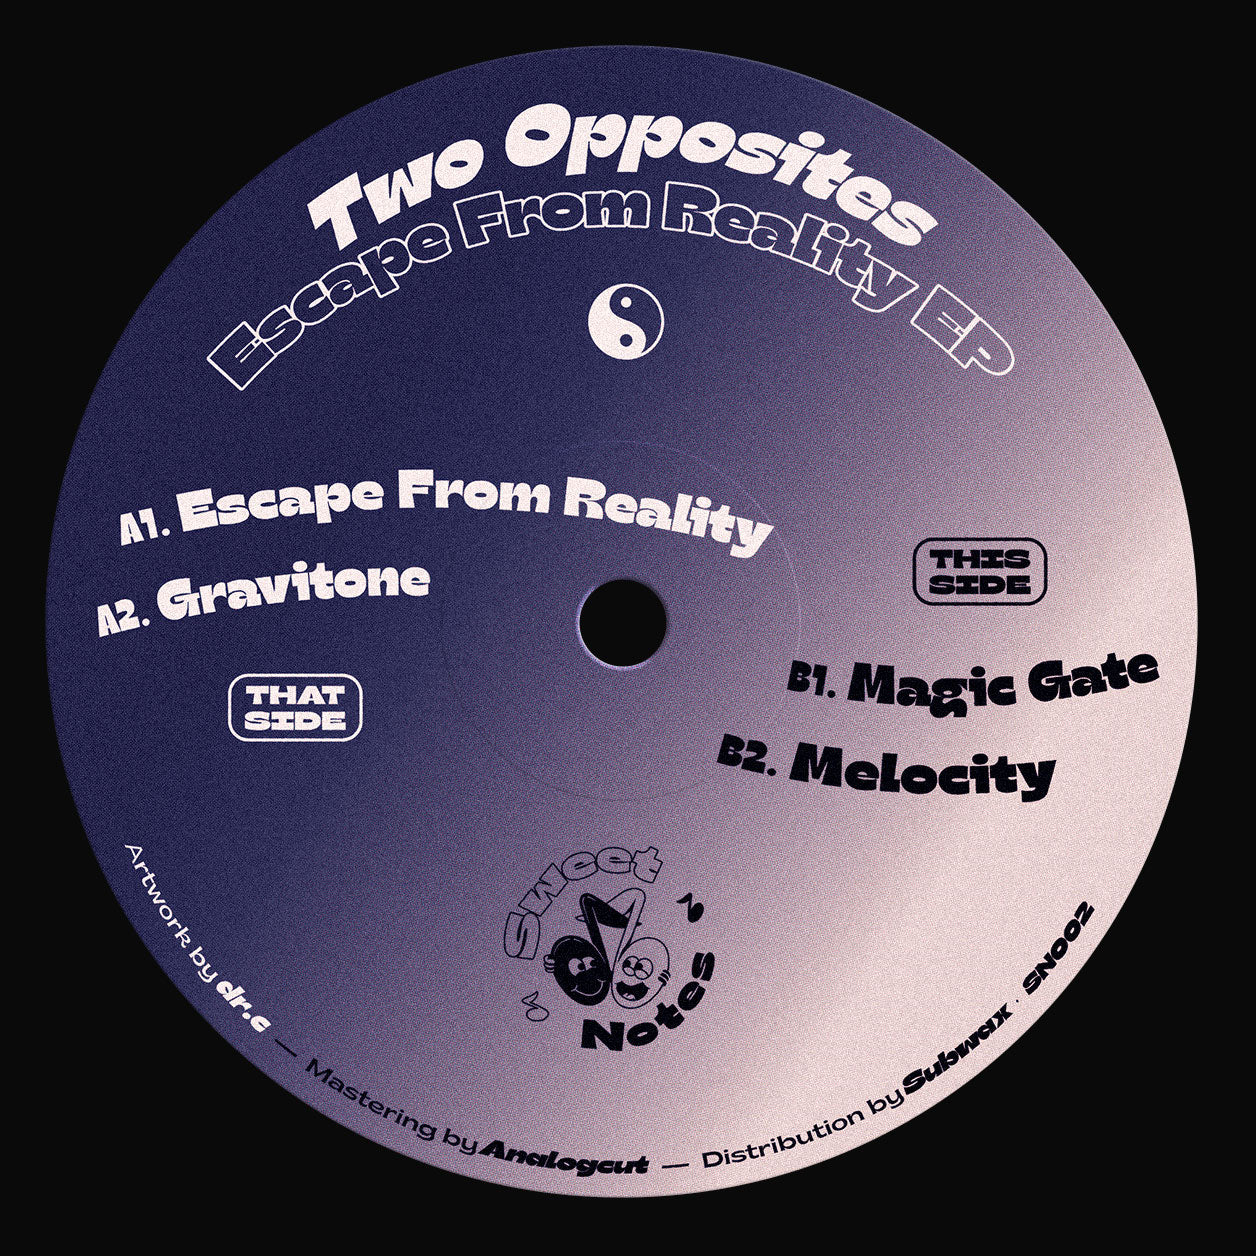 Escape From Reality EP